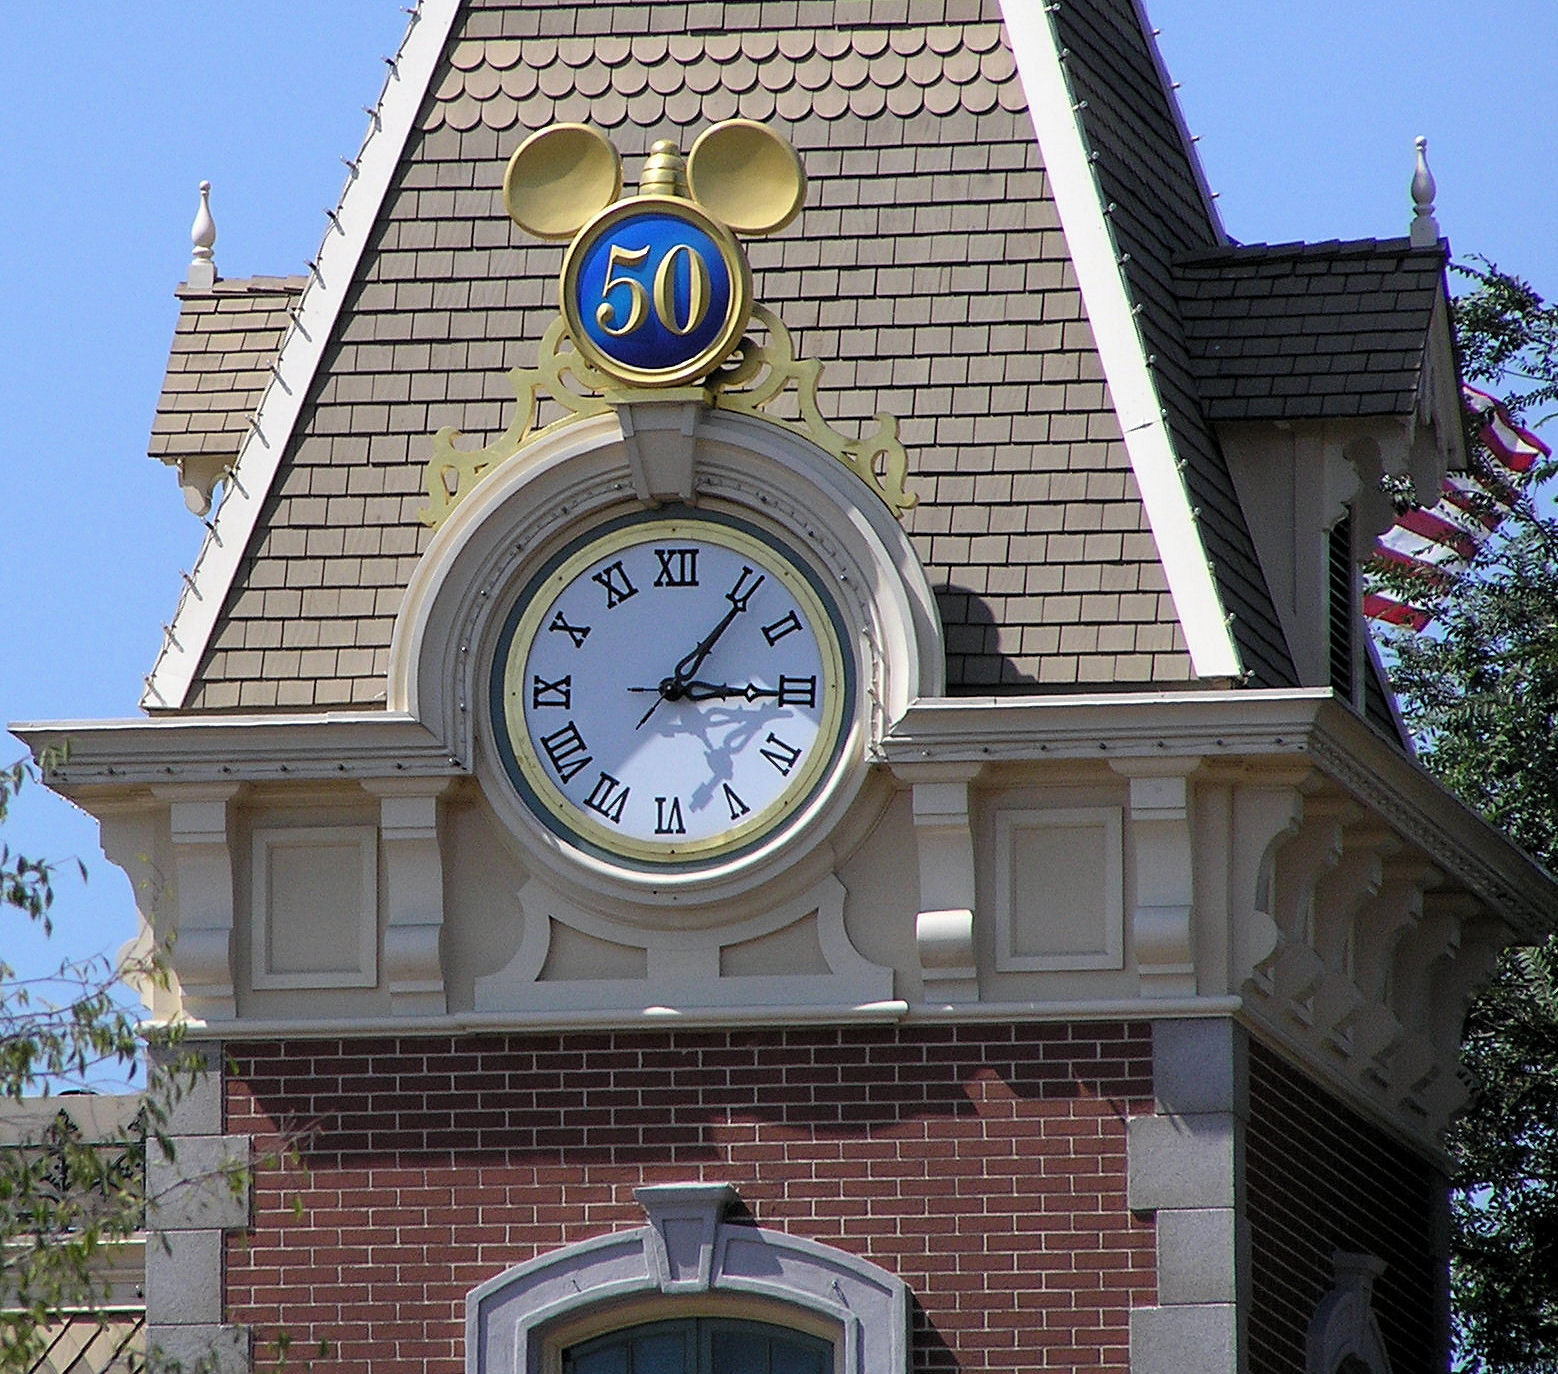 One of the fifty hidden 50s that were all around Disneyland during The Happiest Celebration on Earth.